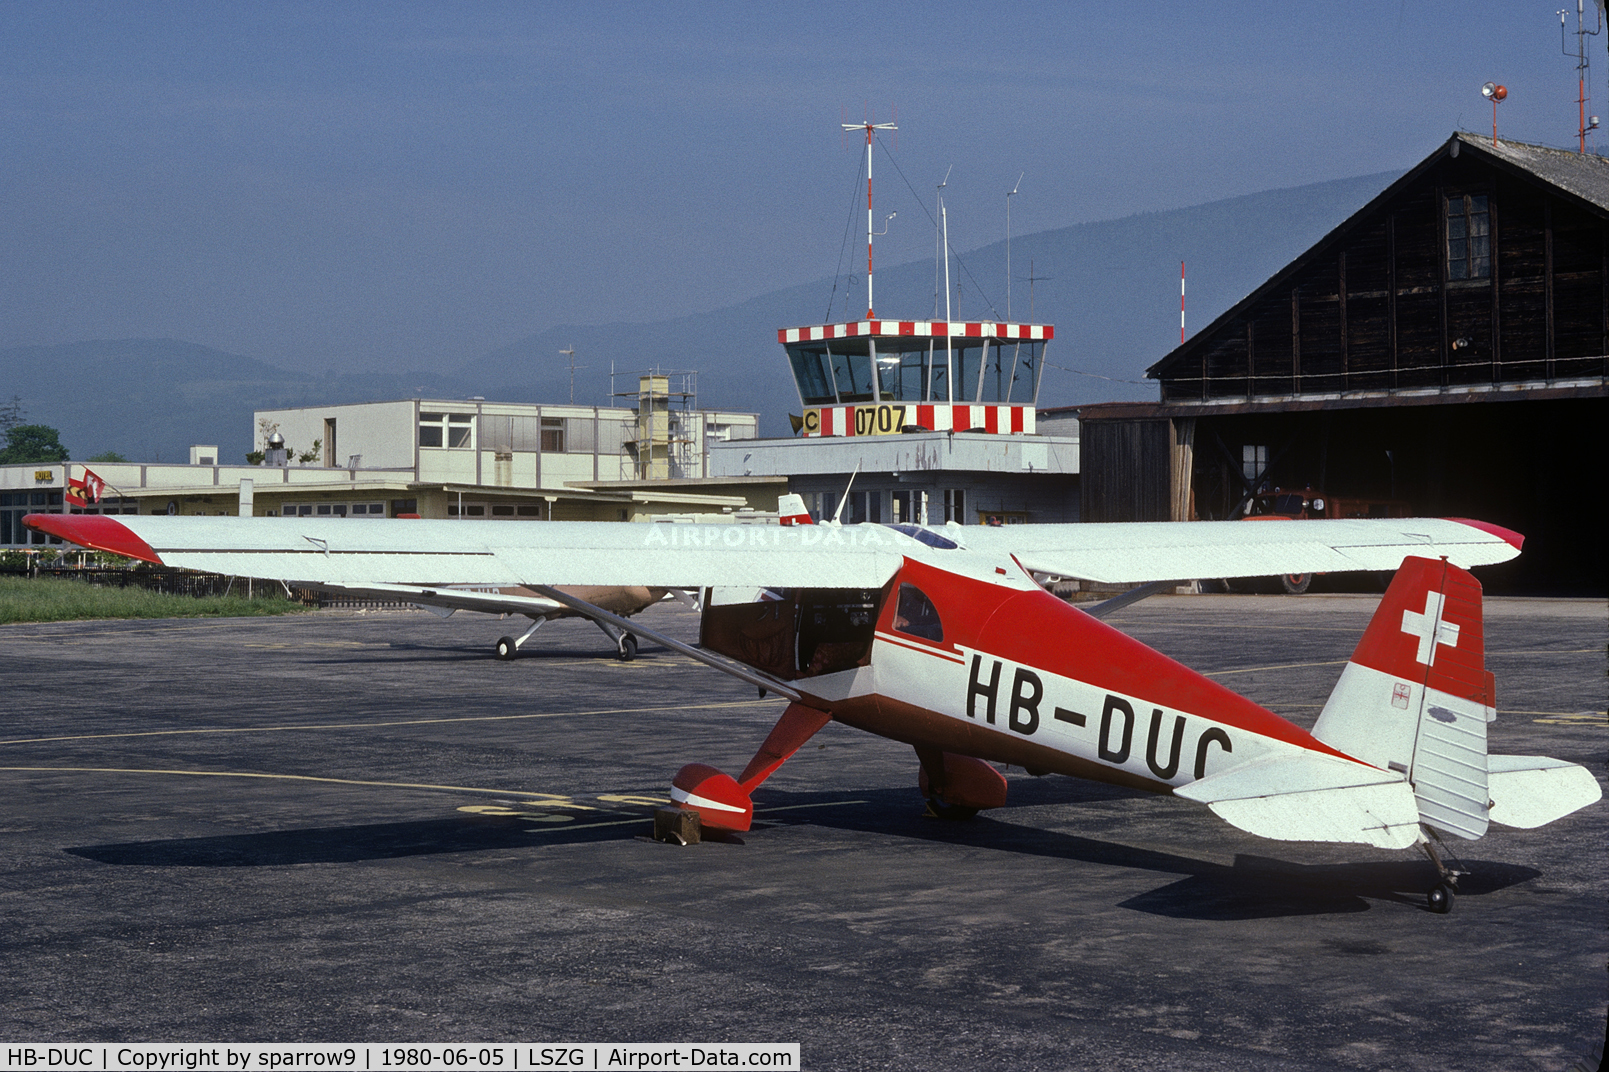 HB-DUC, 1948 Luscombe 8F Silvaire C/N 6295, At grenchen, with the old tower and hangar, before leaving for Denmark. Scanned from a slide.